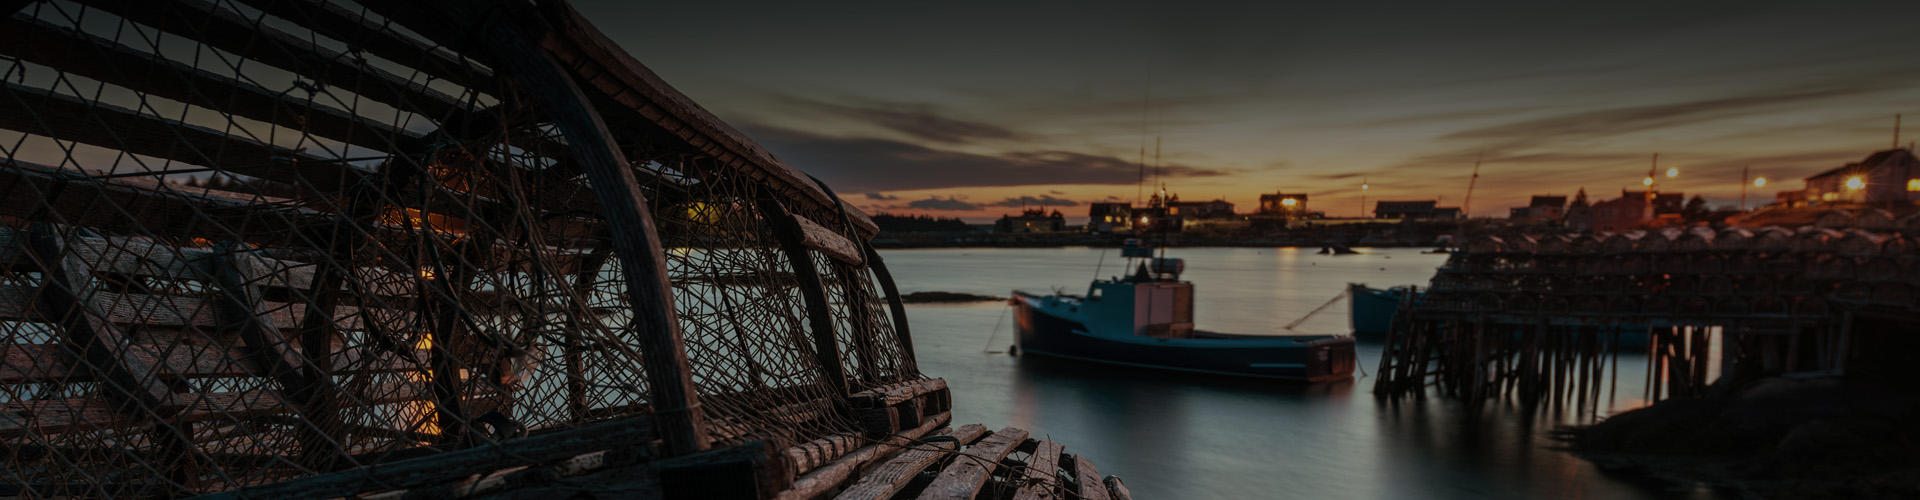 Photo of a lobster pot with fishing boats in the background